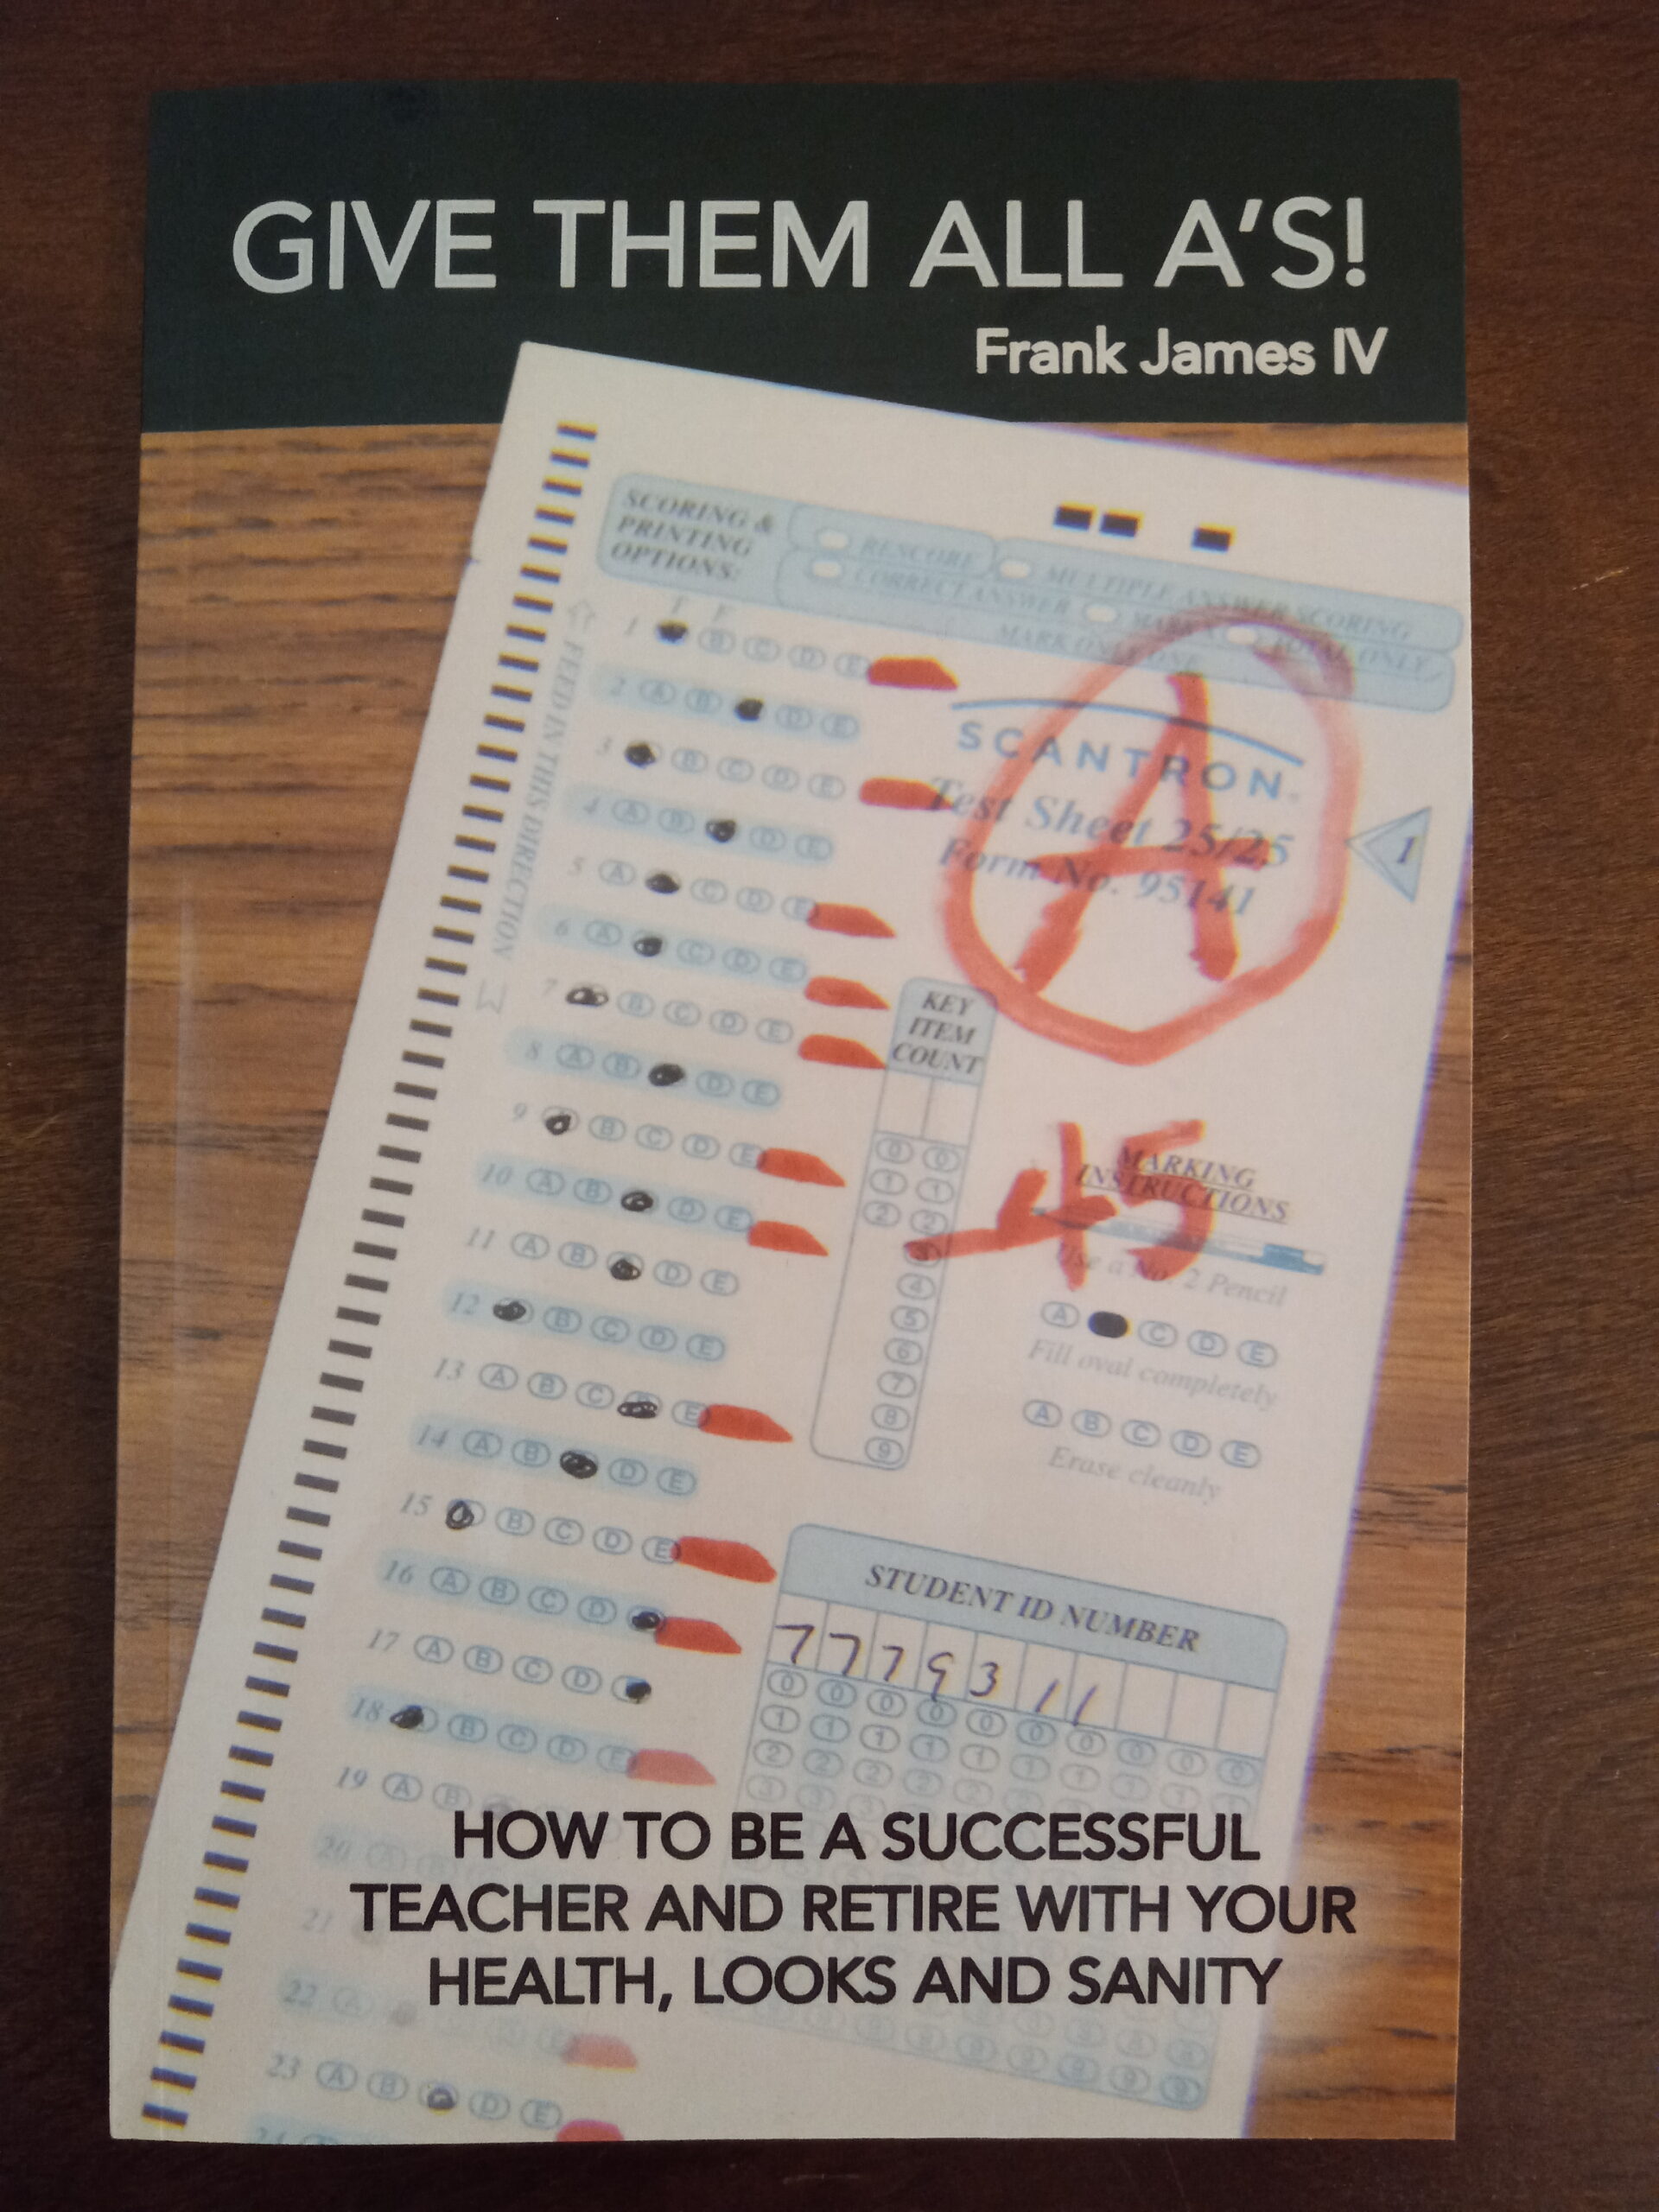 Frank James IV Releases His Newest Book “Give Them All A’s! “